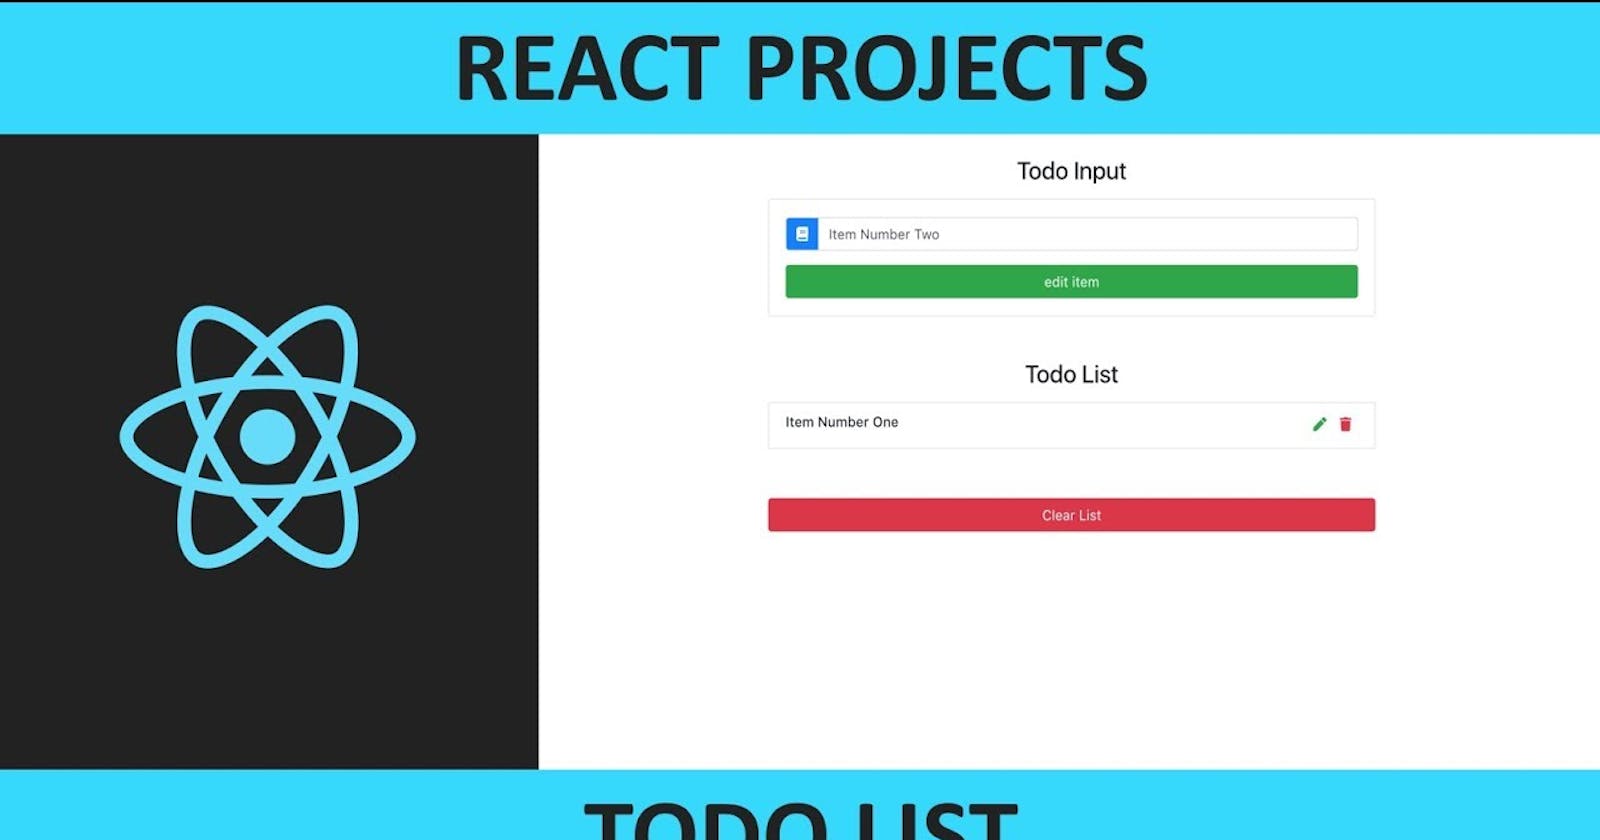 How to Build a TodoApp using ReactJS and Firebase